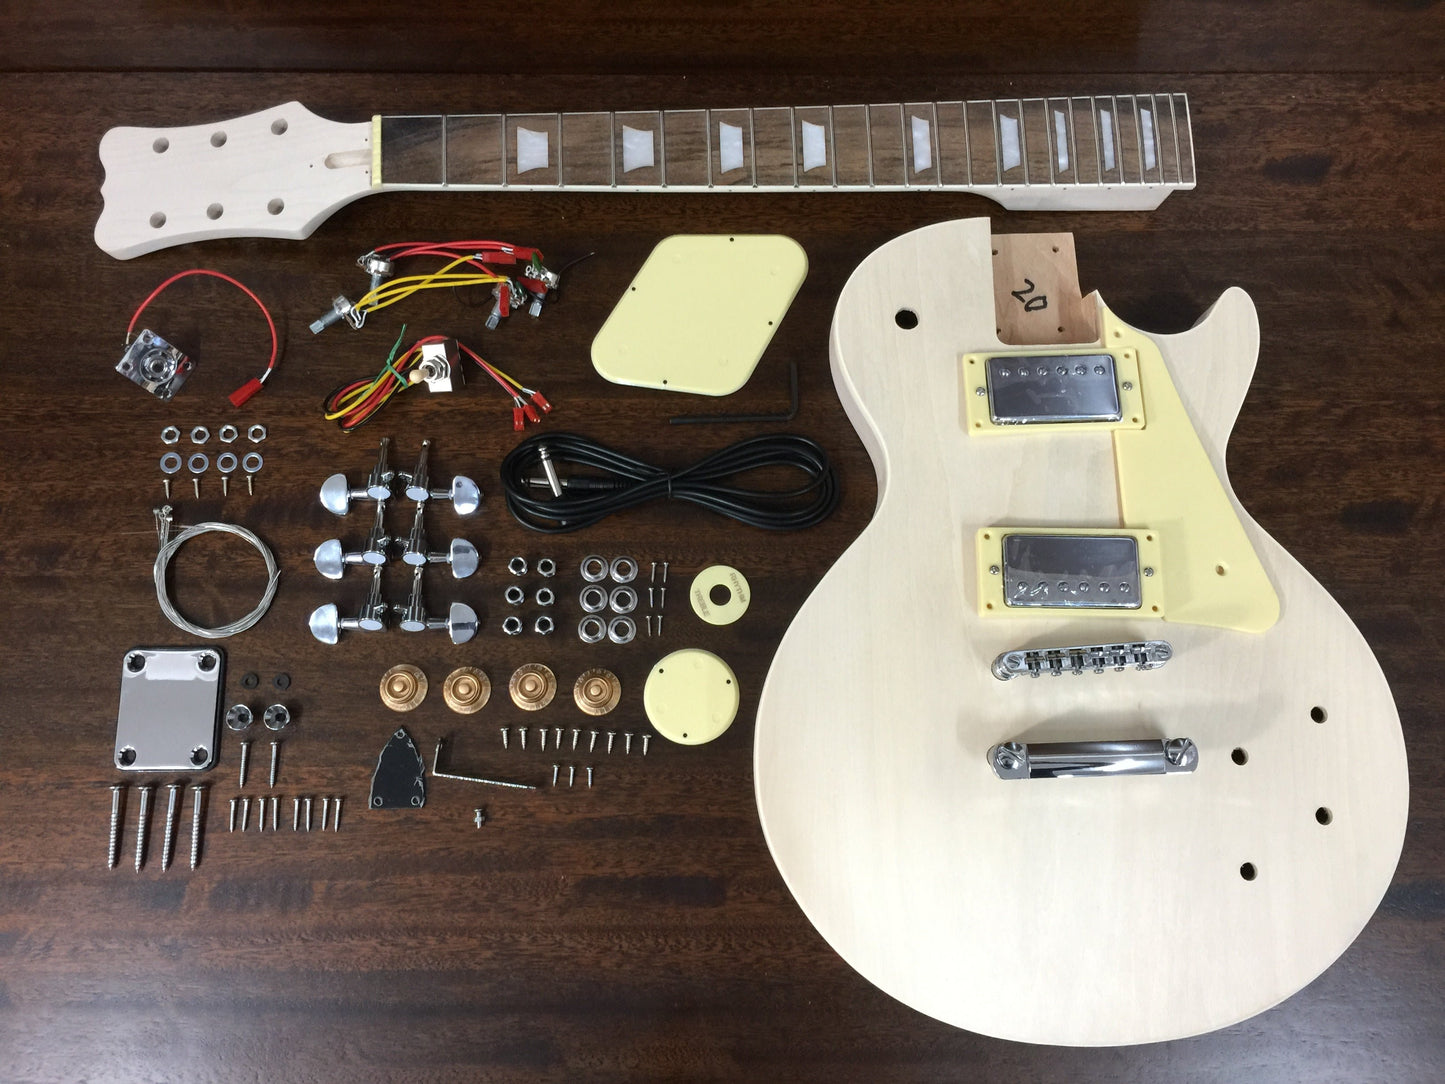 HSLPP19340DIY LP Solid Basswood Body Electric Guitar DIY Kit, No-Soldering, Silver Hardware with bolt-on neck